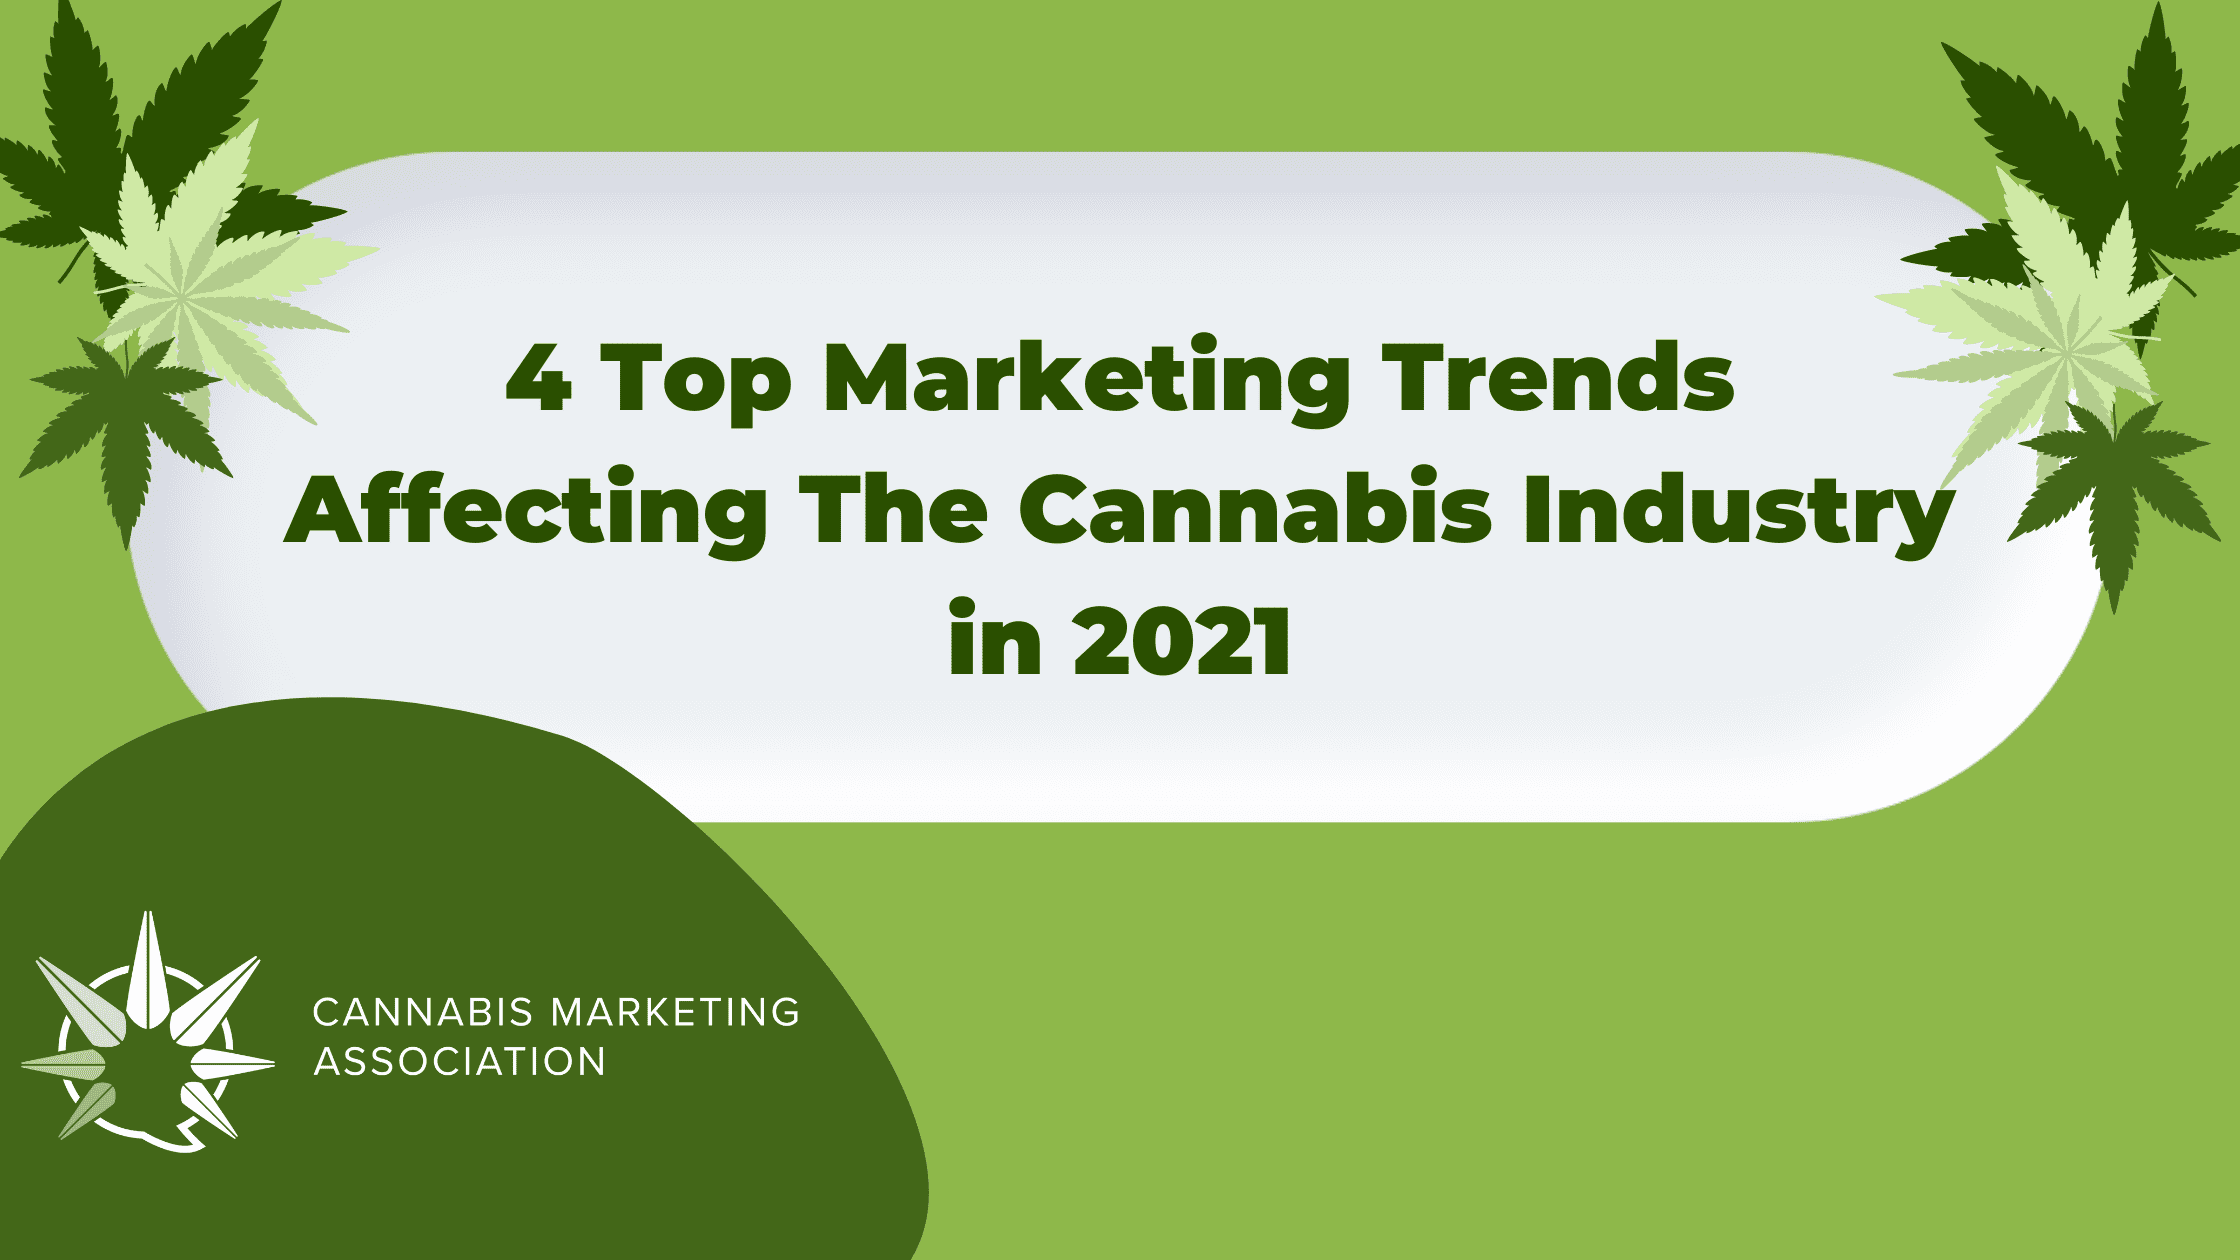 4 Top Marketing Trends Affecting The Cannabis Industry in 2021